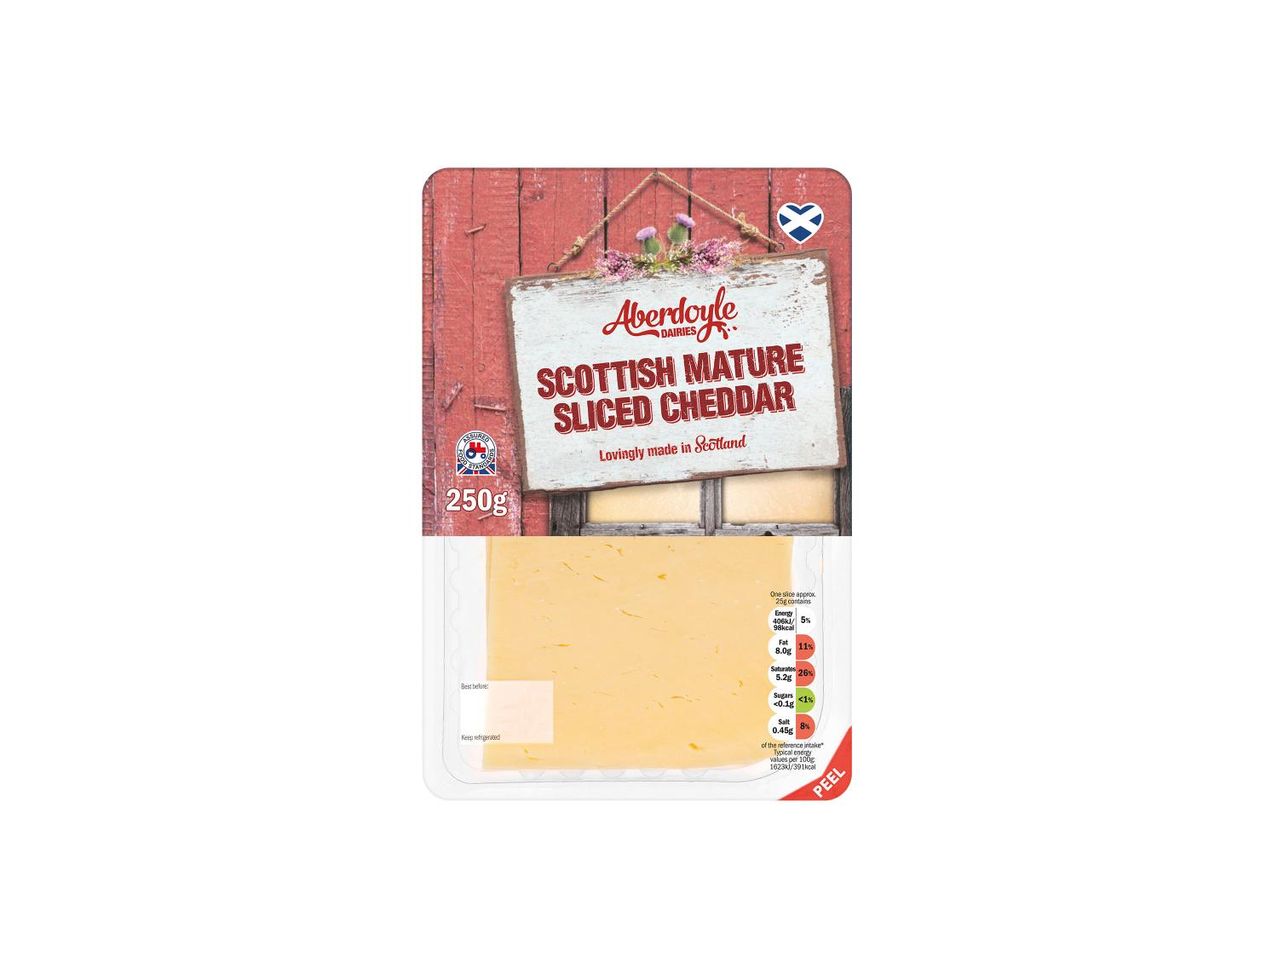 Go to full screen view: Aberdoyle Dairies Scottish Mature Sliced Cheddar - Image 1